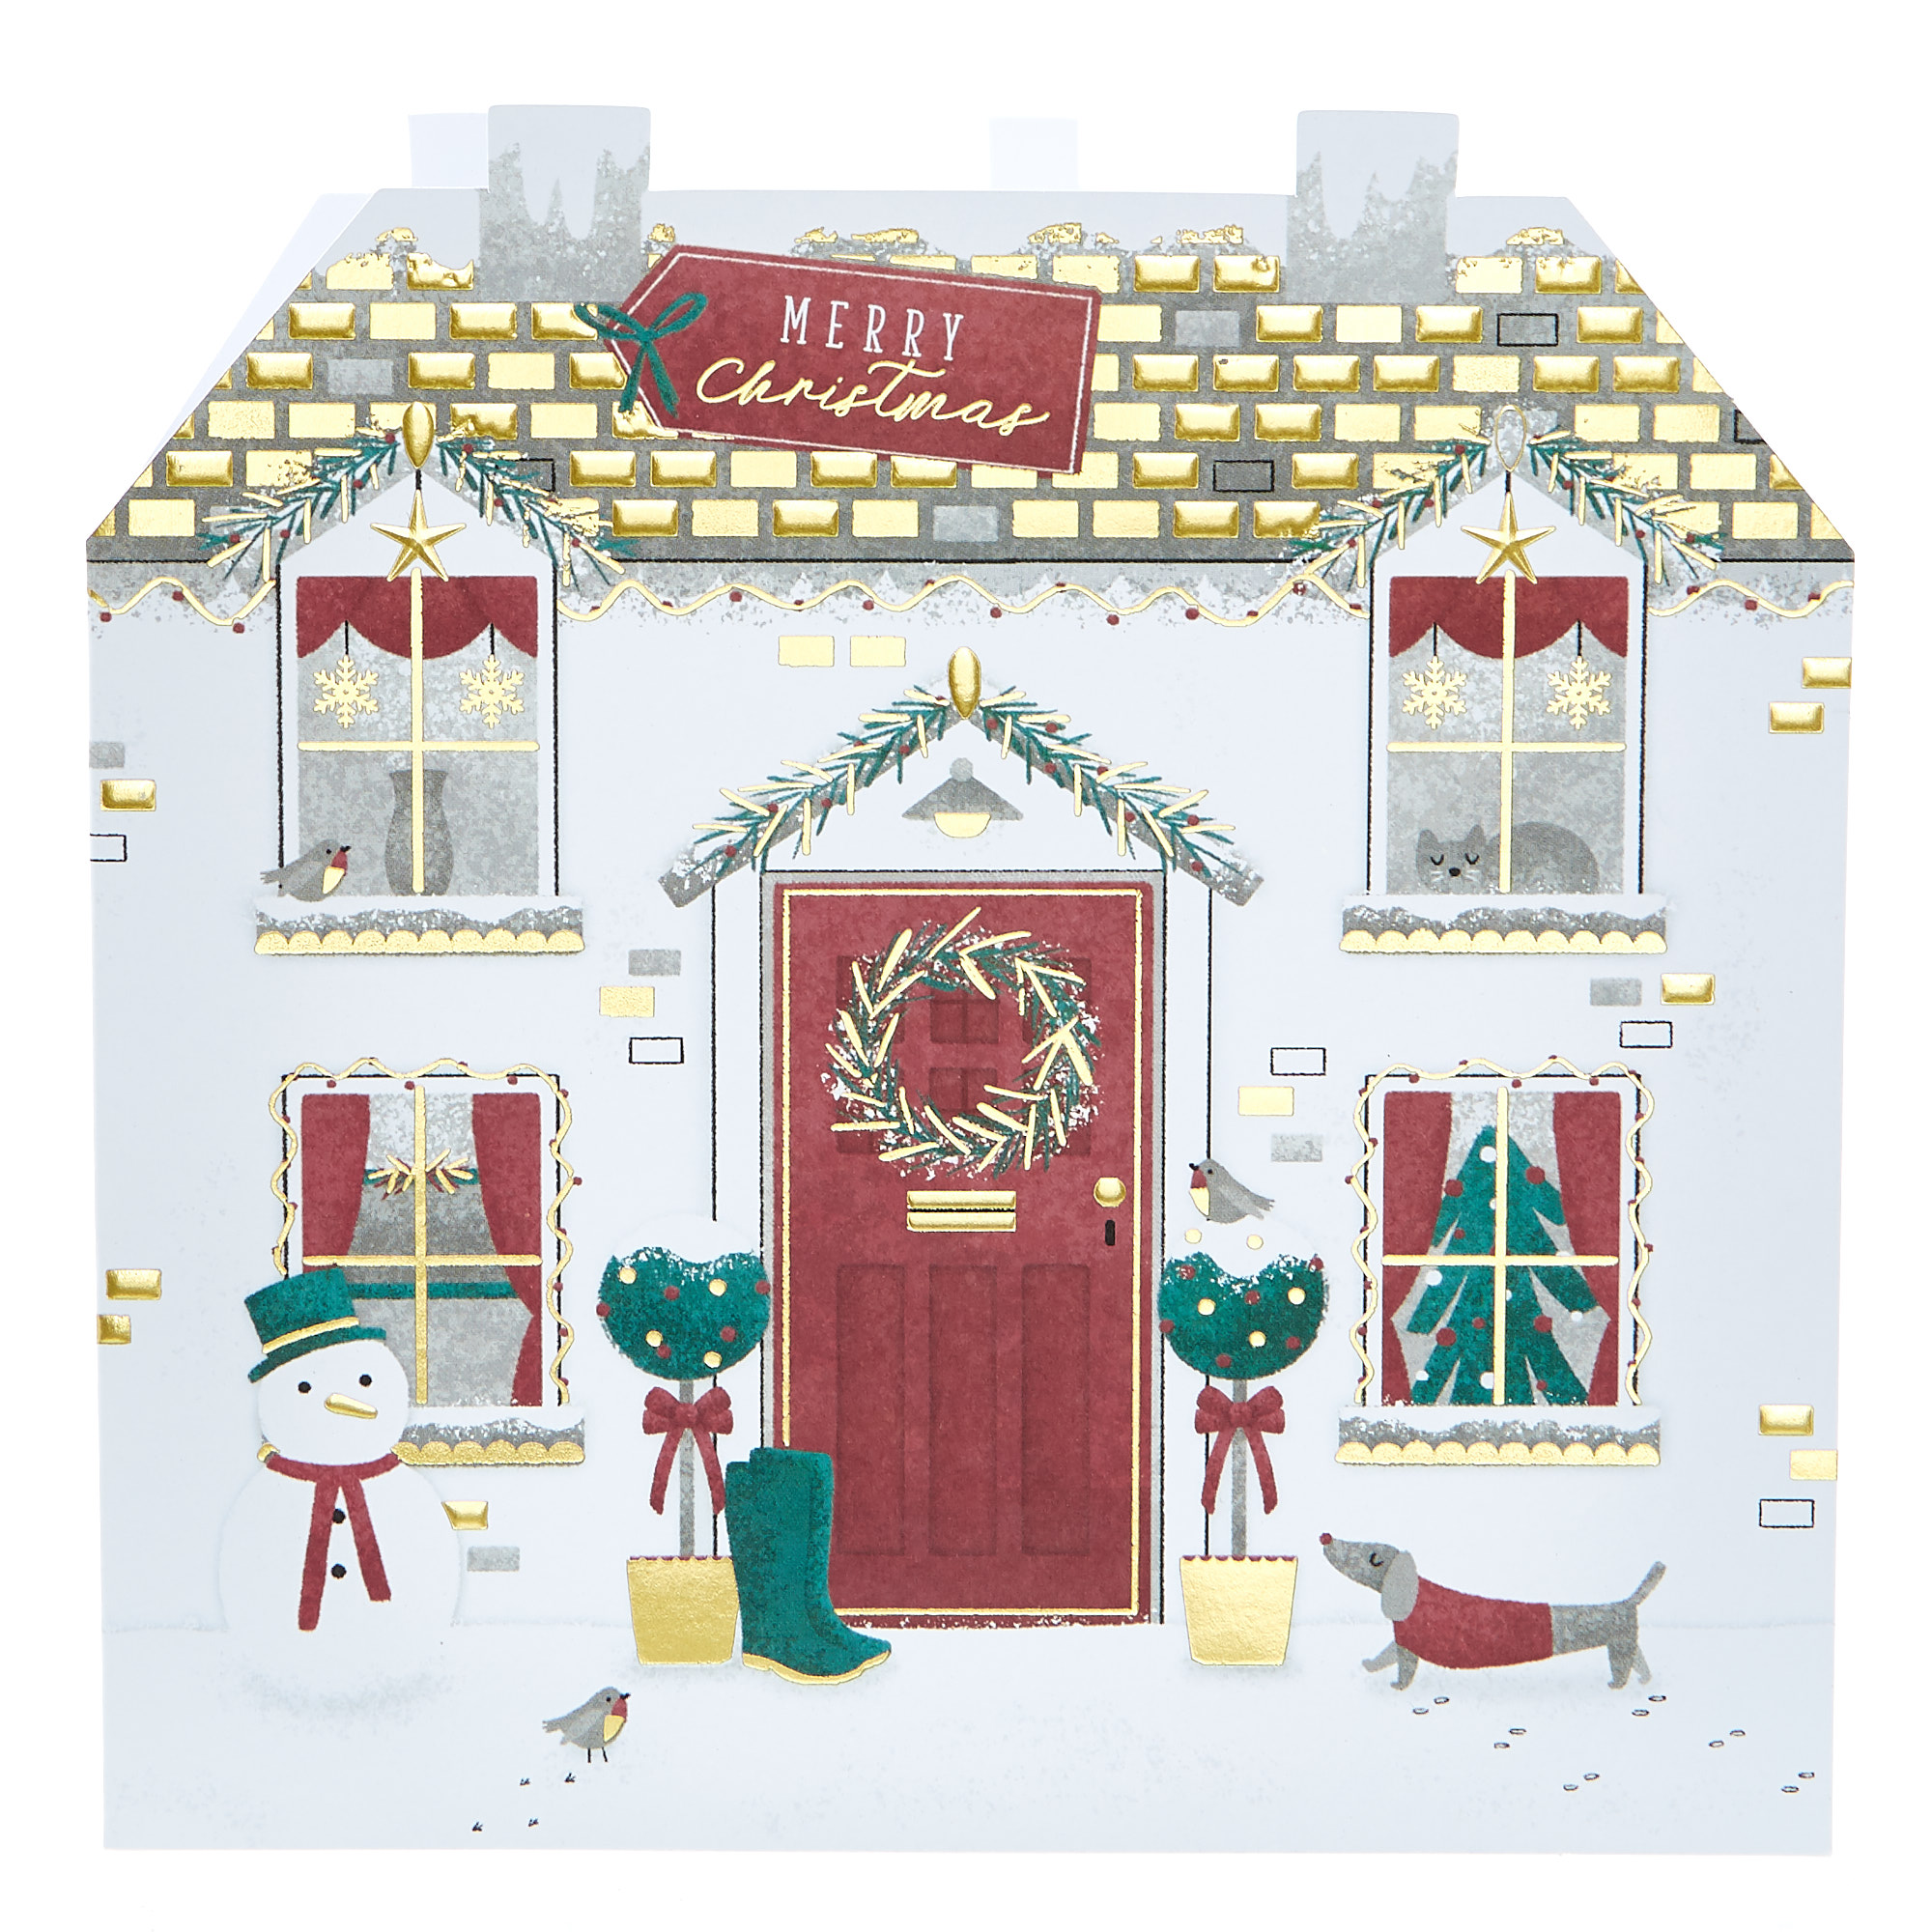 16 Festive Houses Charity Christmas Cards - 2 Designs 